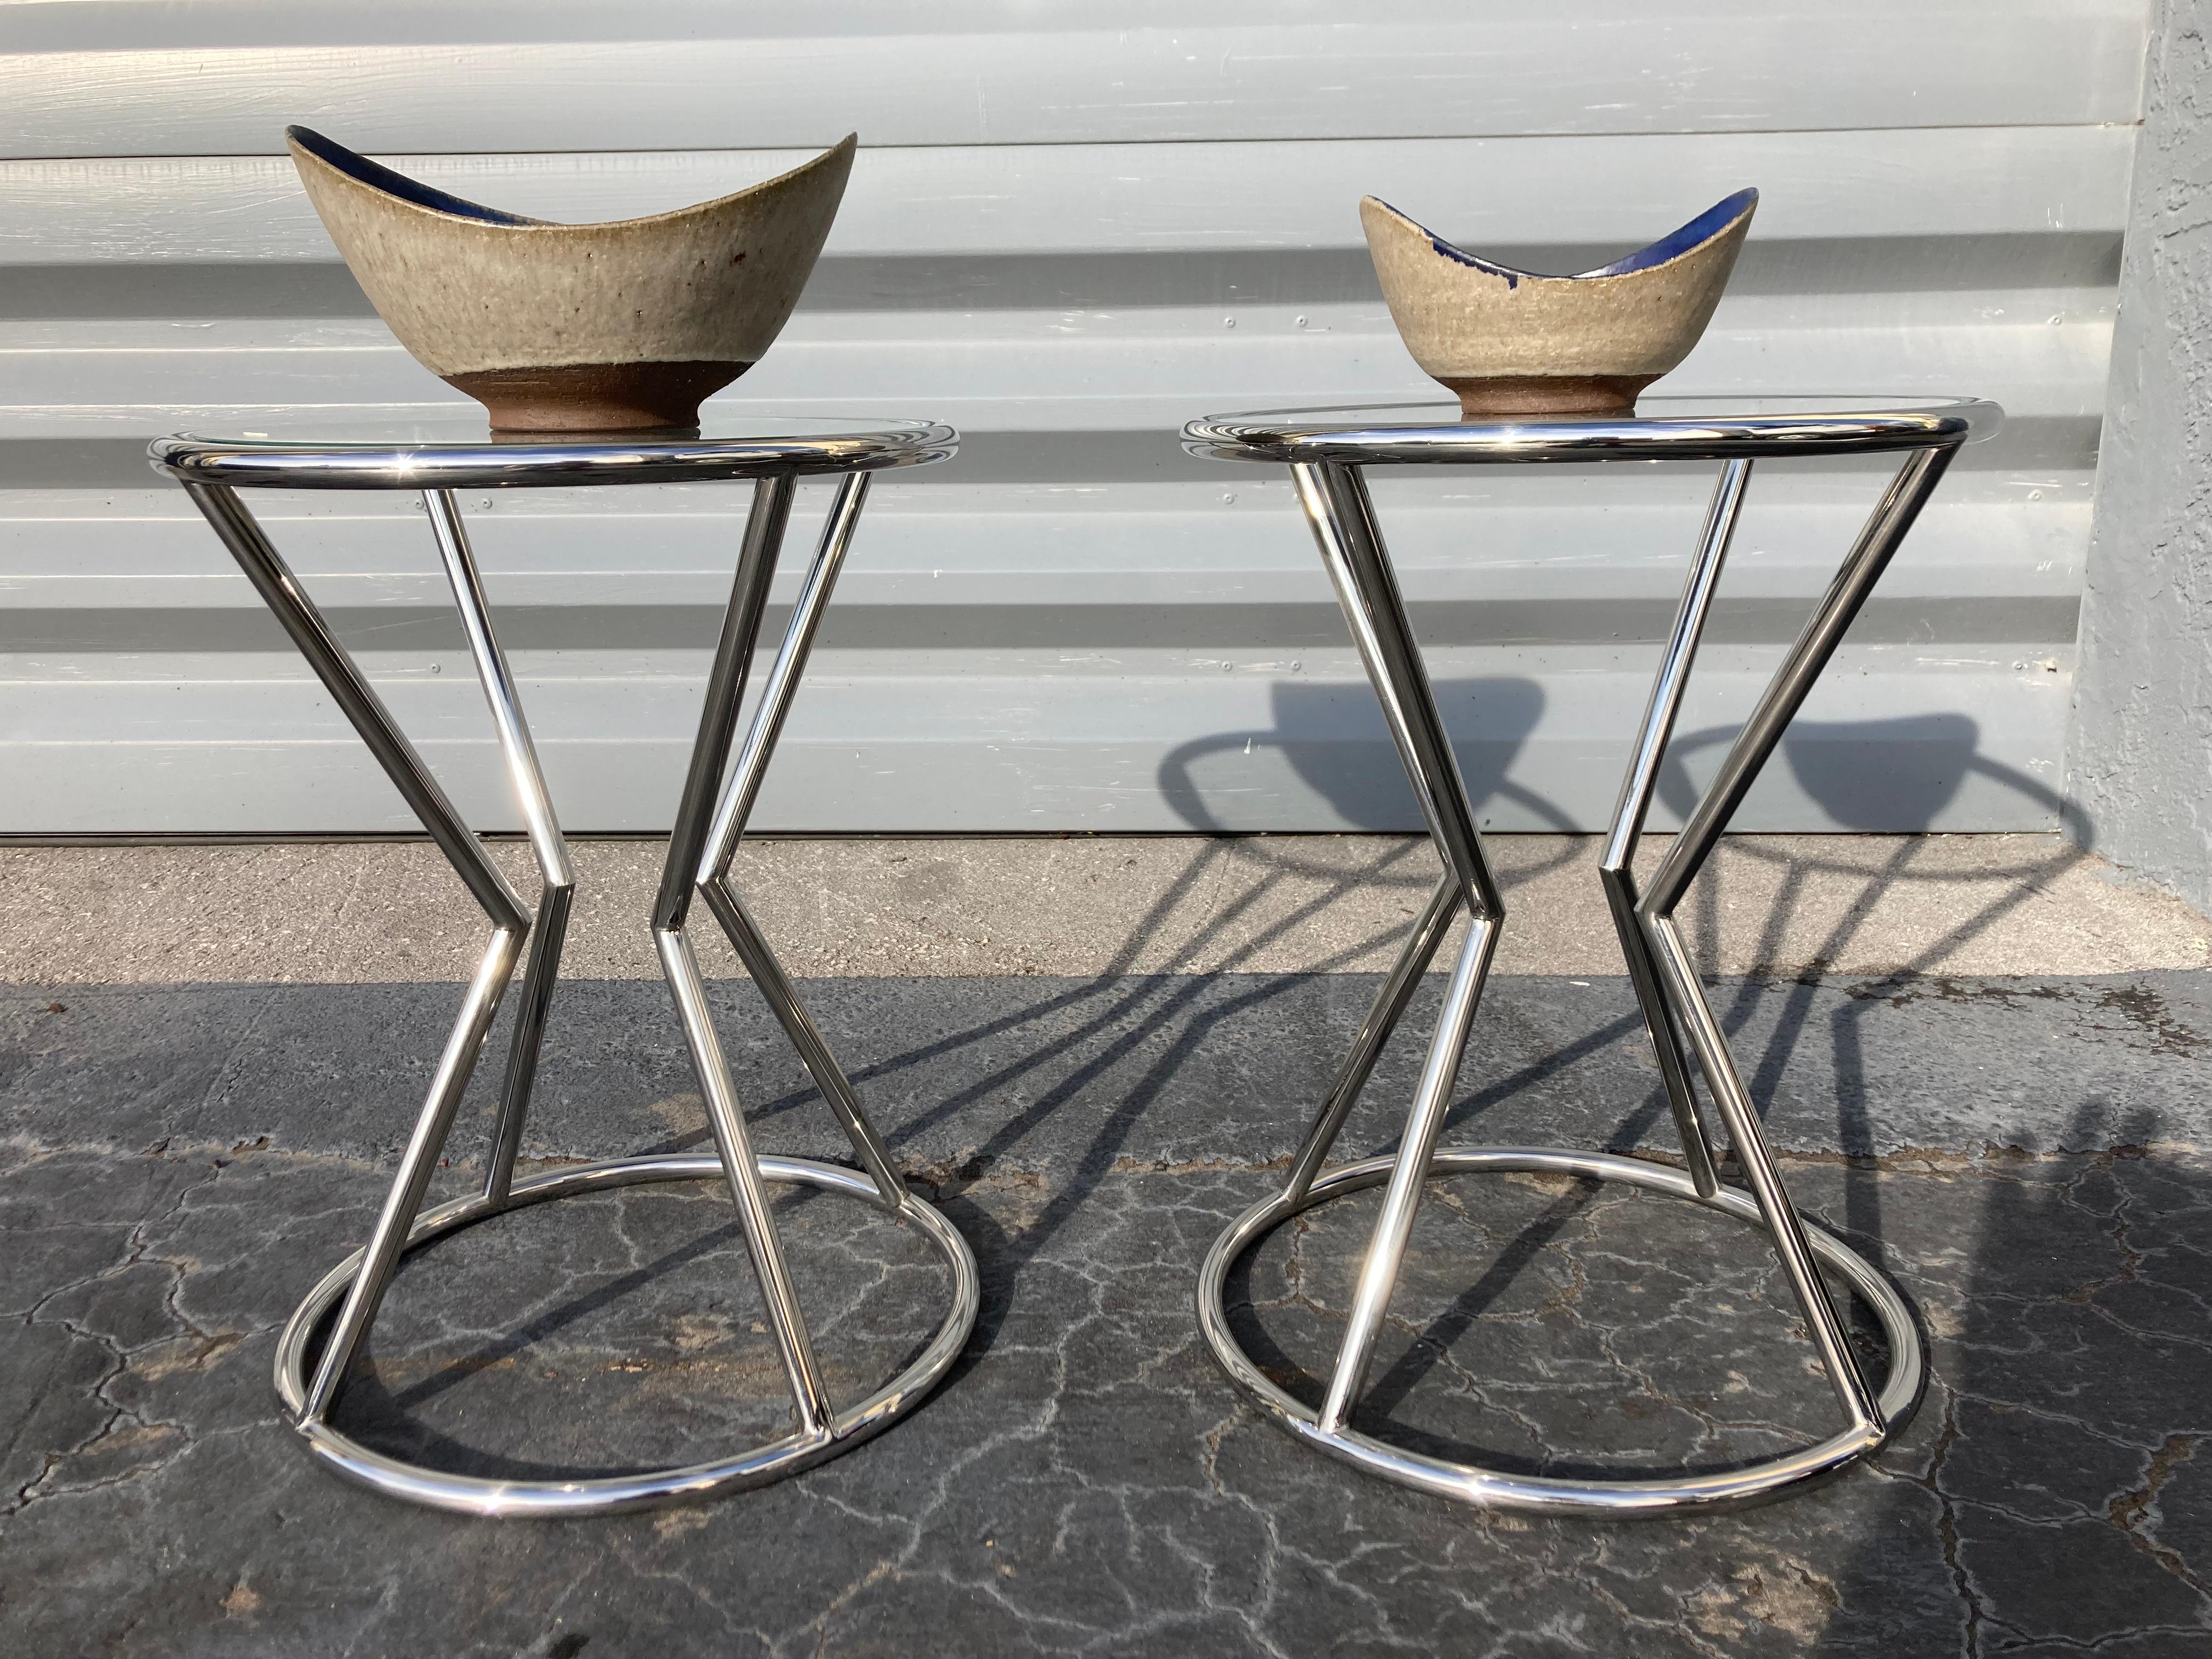 Pair of stainless steel side tables with glass tops.